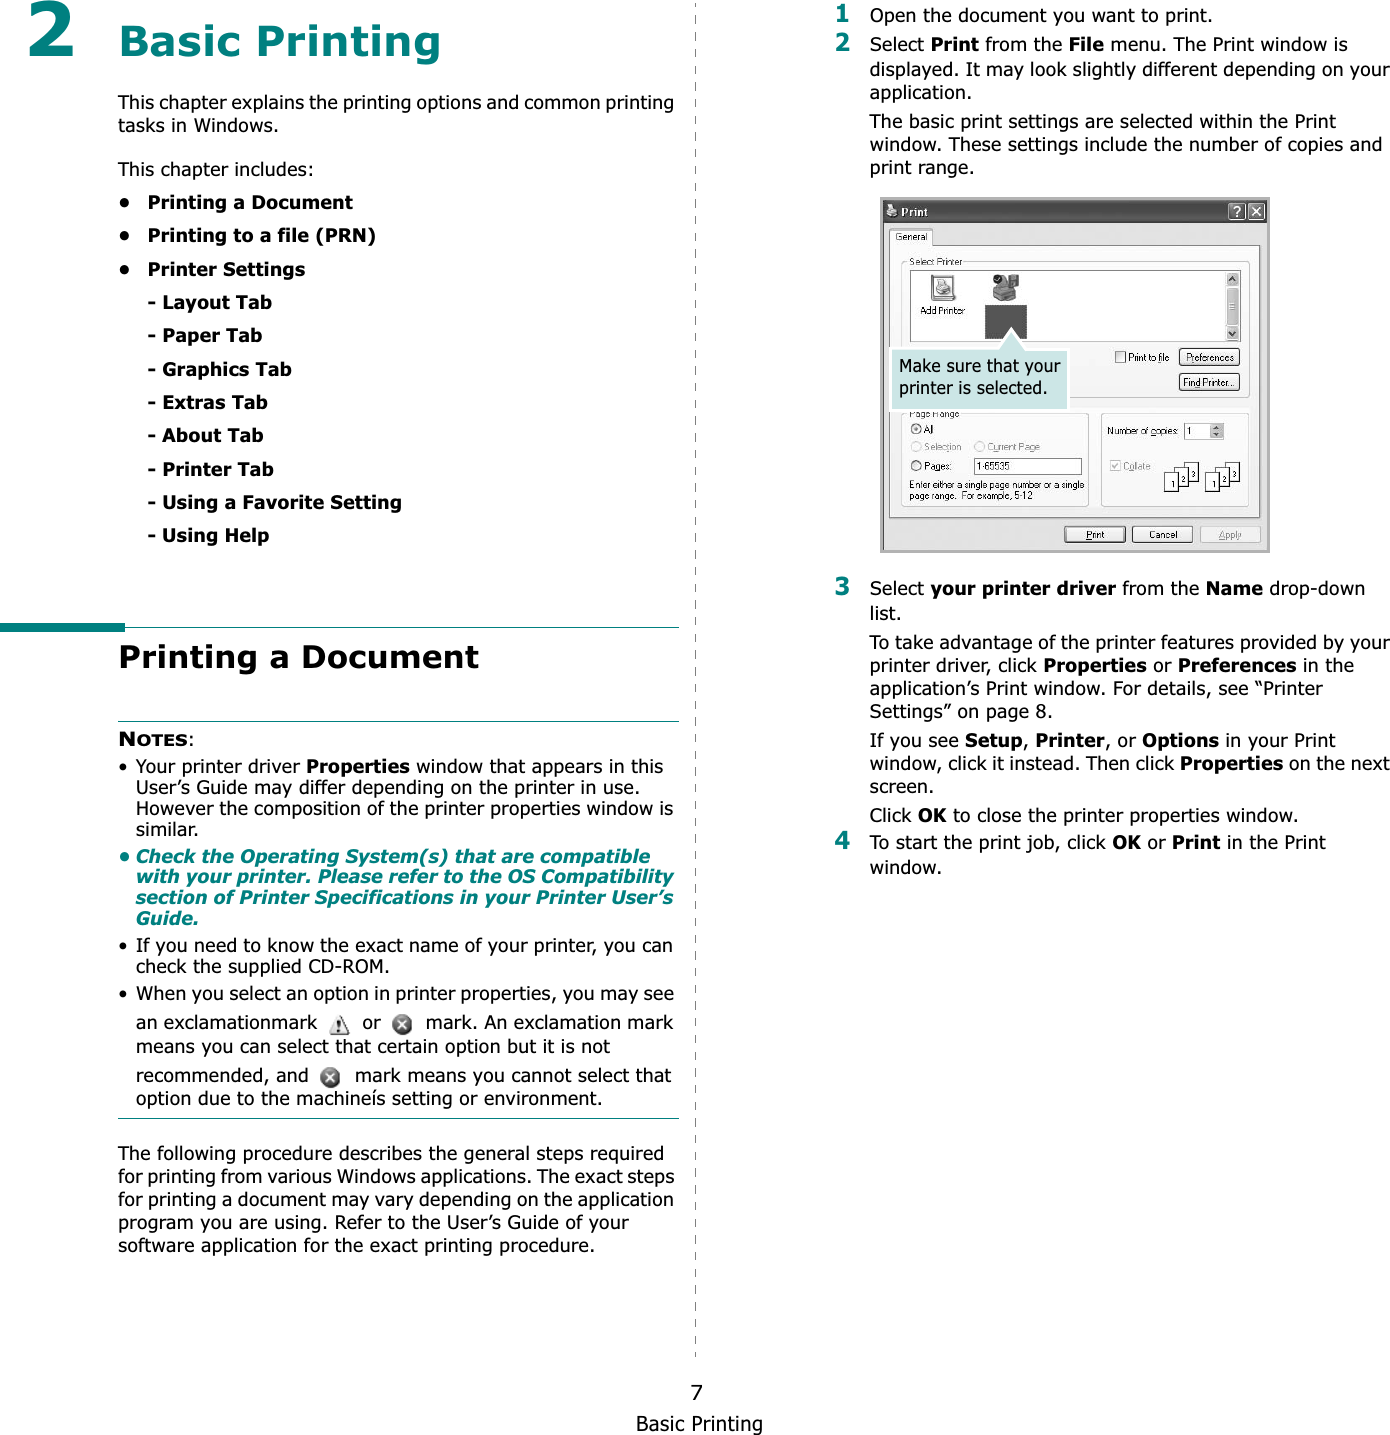 Basic Printing72Basic Printing This chapter explains the printing options and common printing tasks in Windows. This chapter includes:• Printing a Document• Printing to a file (PRN)•Printer Settings- Layout Tab- Paper Tab- Graphics Tab- Extras Tab- About Tab- Printer Tab- Using a Favorite Setting- Using HelpPrinting a DocumentNOTES:• Your printer driver Properties window that appears in this User’s Guide may differ depending on the printer in use. However the composition of the printer properties window is similar.• Check the Operating System(s) that are compatible with your printer. Please refer to the OS Compatibility section of Printer Specifications in your Printer User’s Guide.• If you need to know the exact name of your printer, you can check the supplied CD-ROM.• When you select an option in printer properties, you may see an exclamationmark   or   mark. An exclamation mark means you can select that certain option but it is not recommended, and   mark means you cannot select that option due to the machineís setting or environment.The following procedure describes the general steps required for printing from various Windows applications. The exact steps for printing a document may vary depending on the application program you are using. Refer to the User’s Guide of your software application for the exact printing procedure.1Open the document you want to print.2Select Print from the File menu. The Print window is displayed. It may look slightly different depending on your application. The basic print settings are selected within the Print window. These settings include the number of copies and print range.3Select your printer driver from the Name drop-down list.To take advantage of the printer features provided by your printer driver, click Properties or Preferences in the application’s Print window. For details, see “Printer Settings” on page 8.If you see Setup,Printer, or Options in your Print window, click it instead. Then click Properties on the next screen.Click OK to close the printer properties window.4To start the print job, click OK or Print in the Print window.Make sure that your printer is selected.